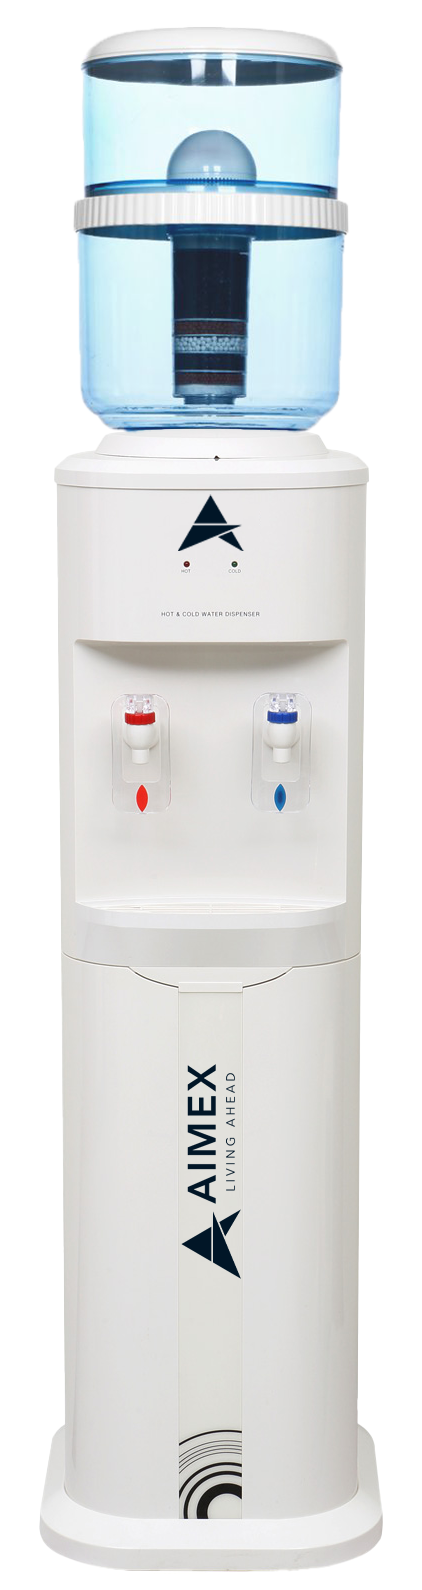 Luxurious White Free Standing Hot and Cold-Water Dispenser with Filter Bottle and LG Compressor - Shoppers Haven  - Appliances > Appliances Others     